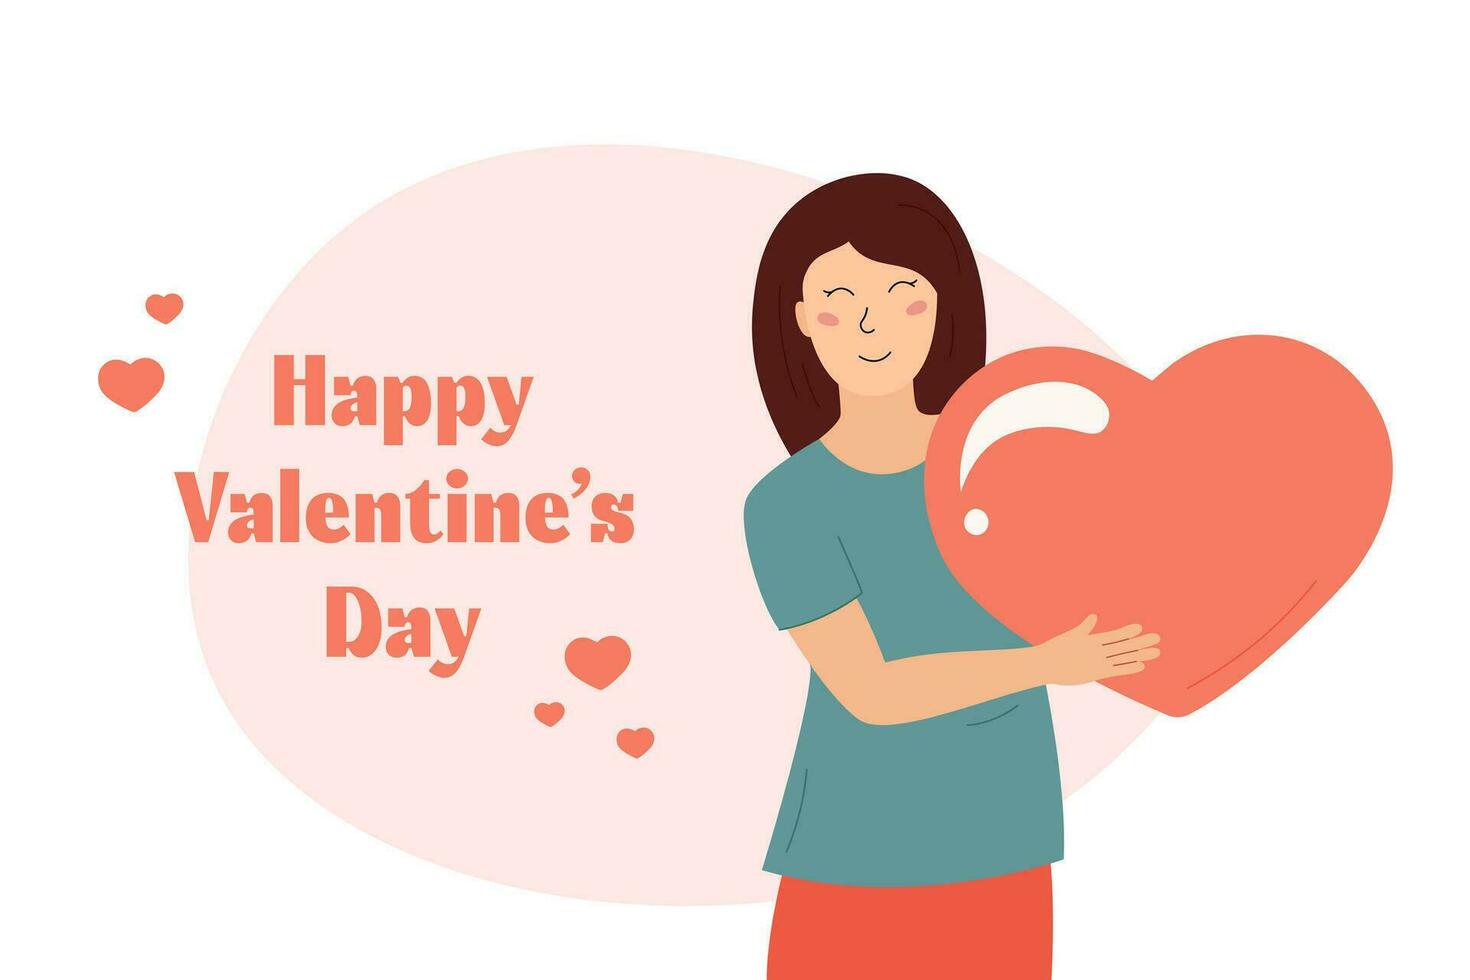 Happy Valentines Day greeting card. Smiling woman holding huge heart. Cute big Love symbol in hands of girl. Flat vector illustration. Valentine celebration romantic poster, banner